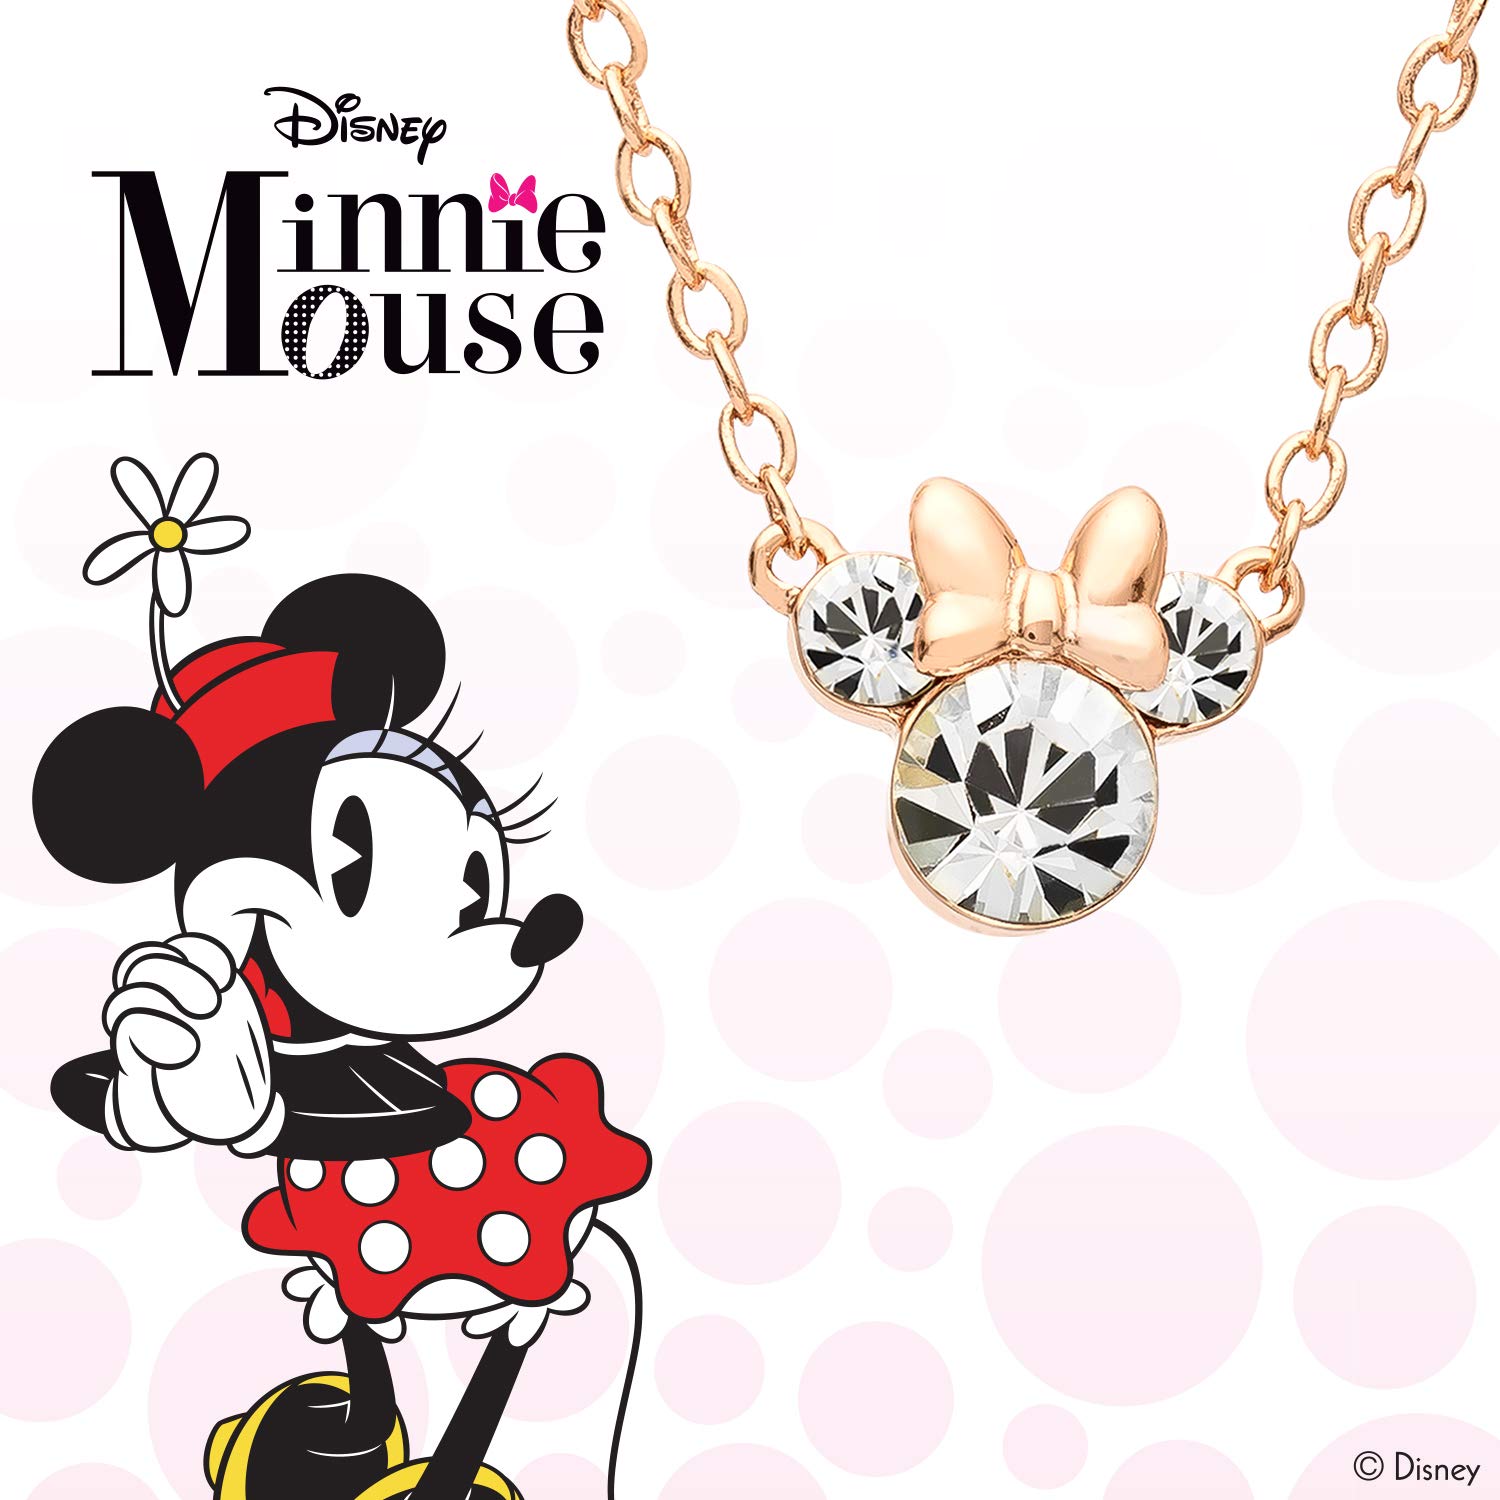 Disney Minnie Mouse Crystal Birthstone Jewelry, Birth Month Pendant Necklace, Silver Plated